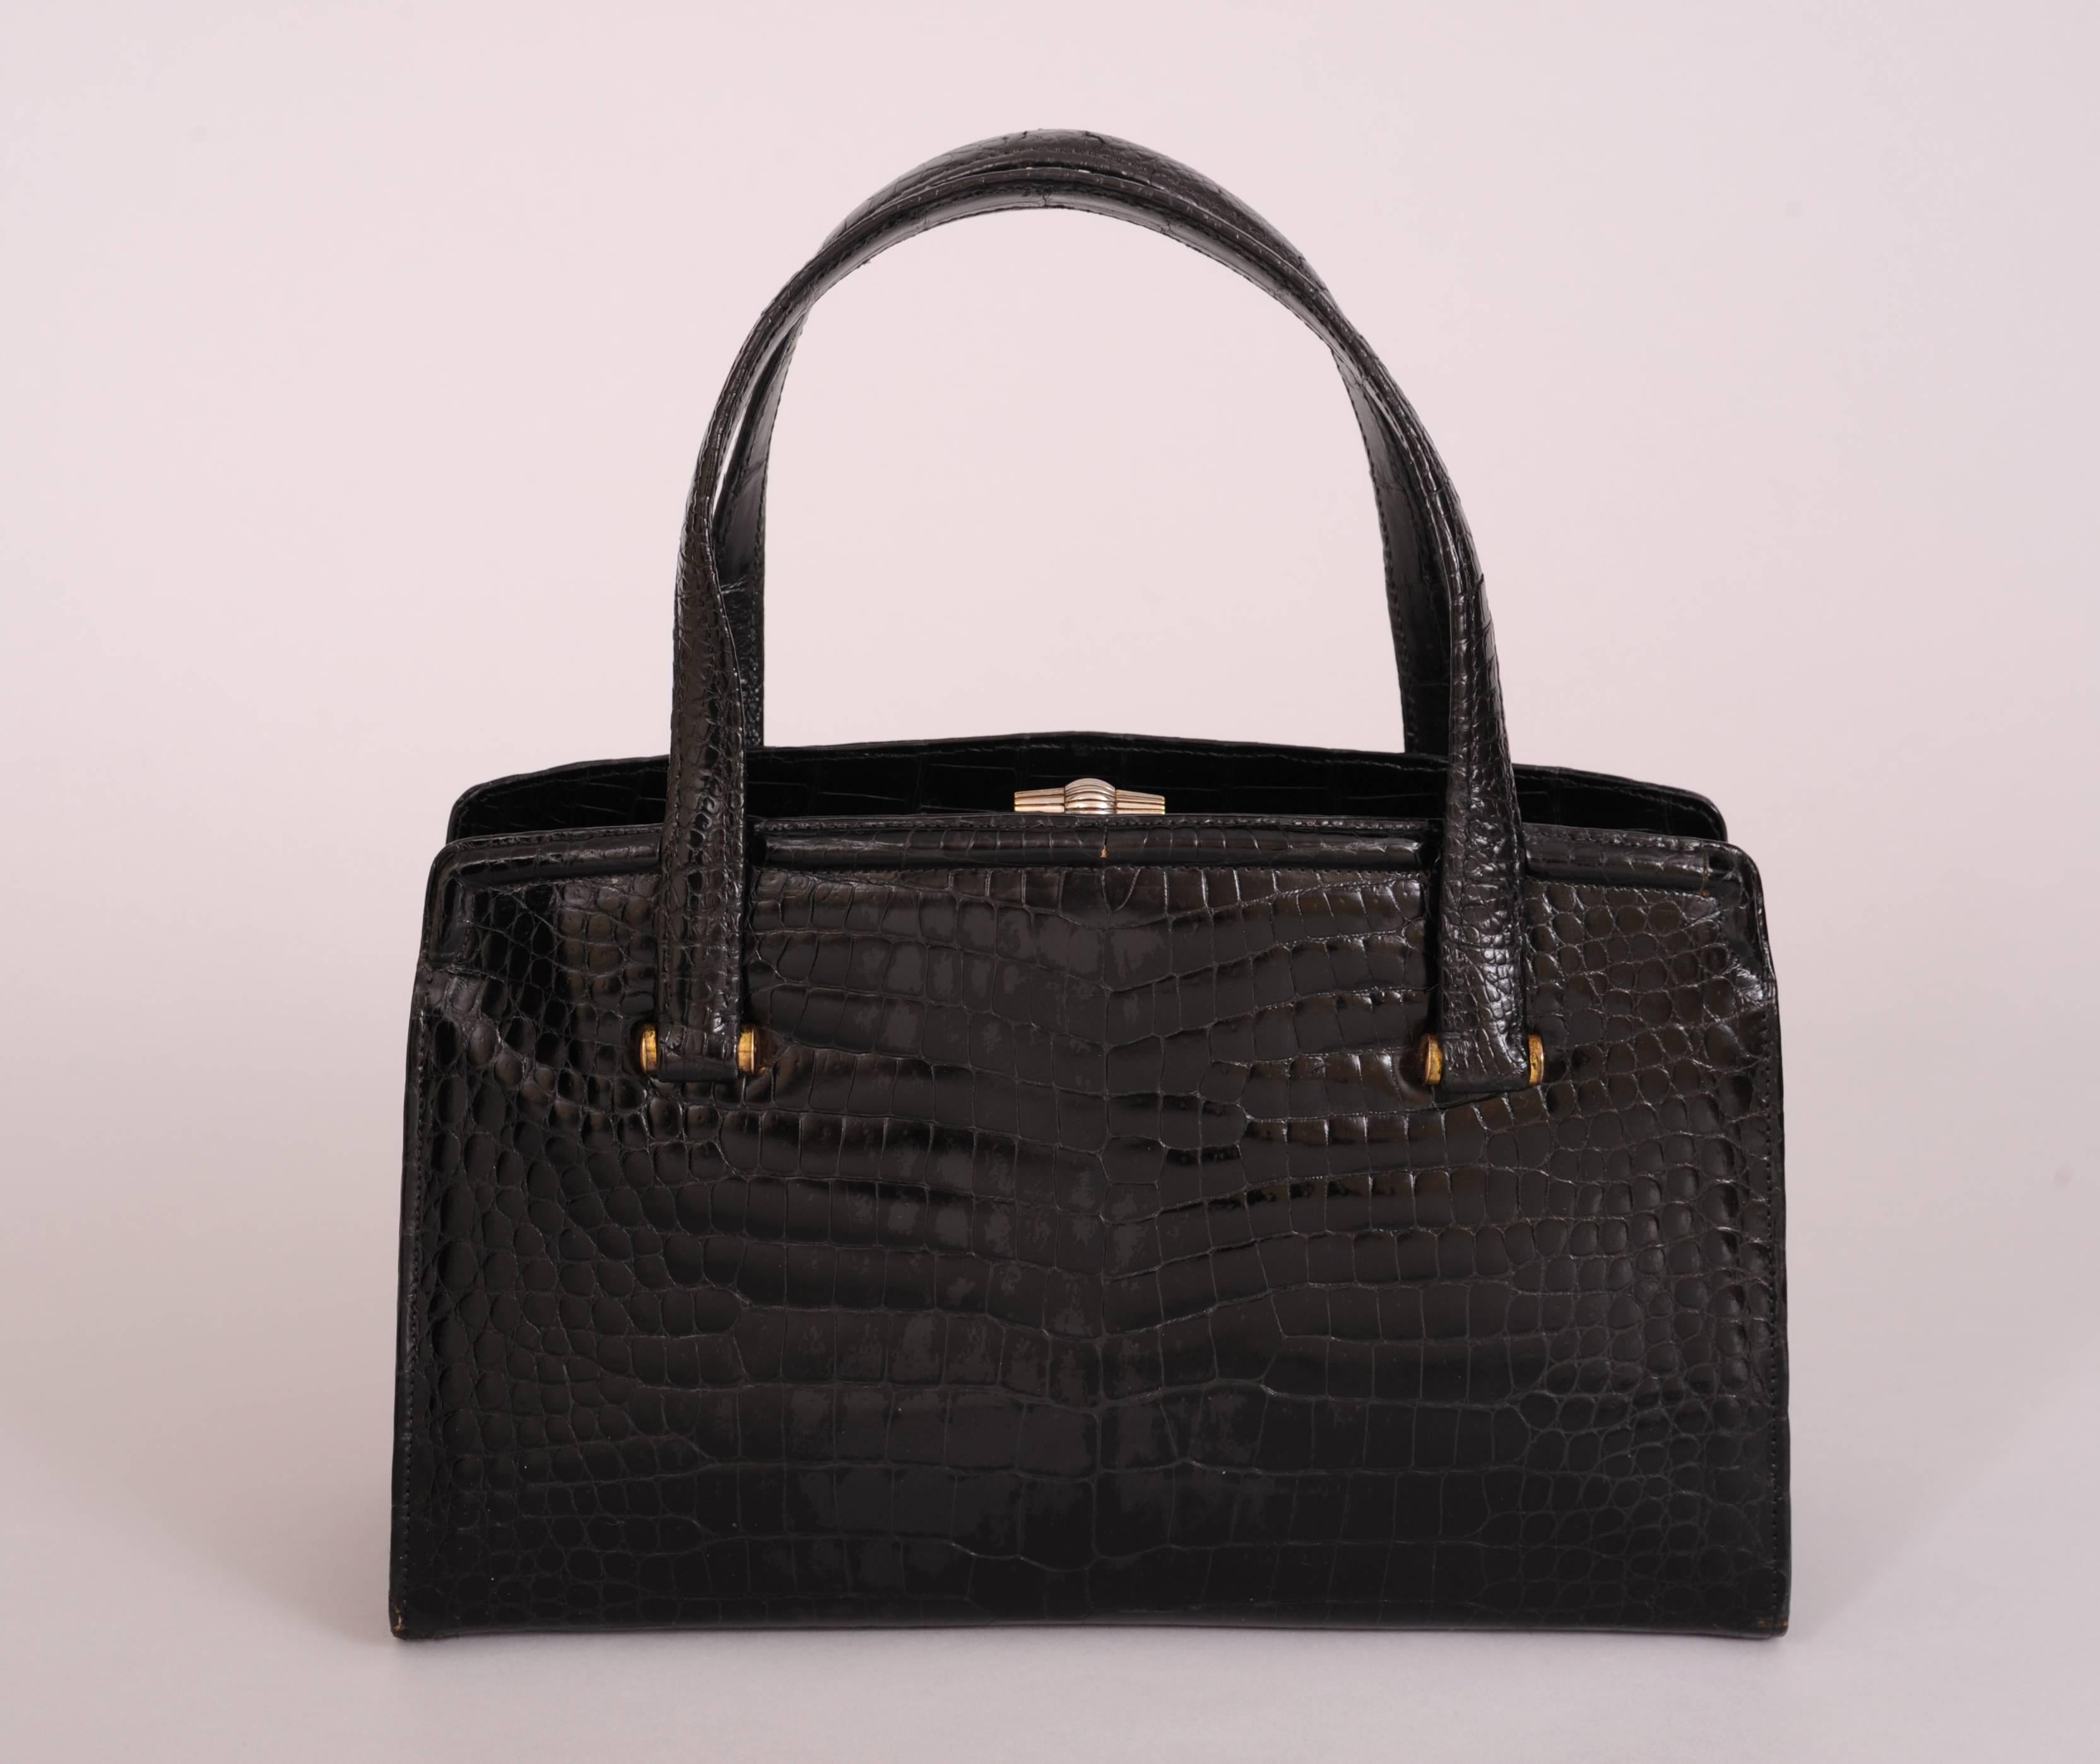 A chic black crocodile bag from Gucci has a leather lined center section with a silver clasp. There is a zip pocket and four slip pockets inside. There is a generous leather lined open pocket on each side of the center. The bag is in excellent